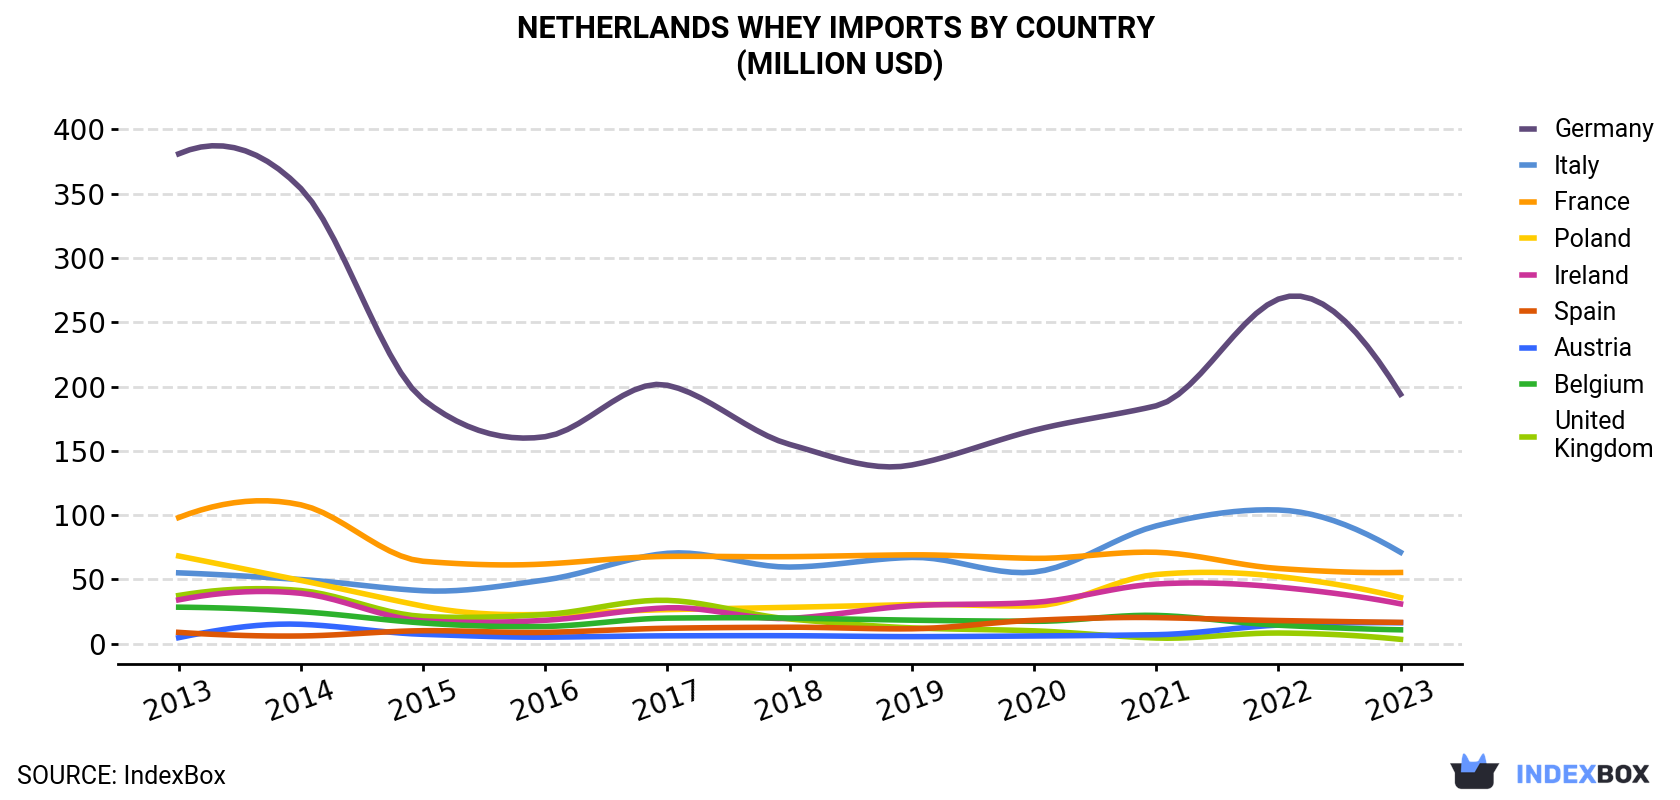 Netherlands Whey Imports By Country (Million USD)